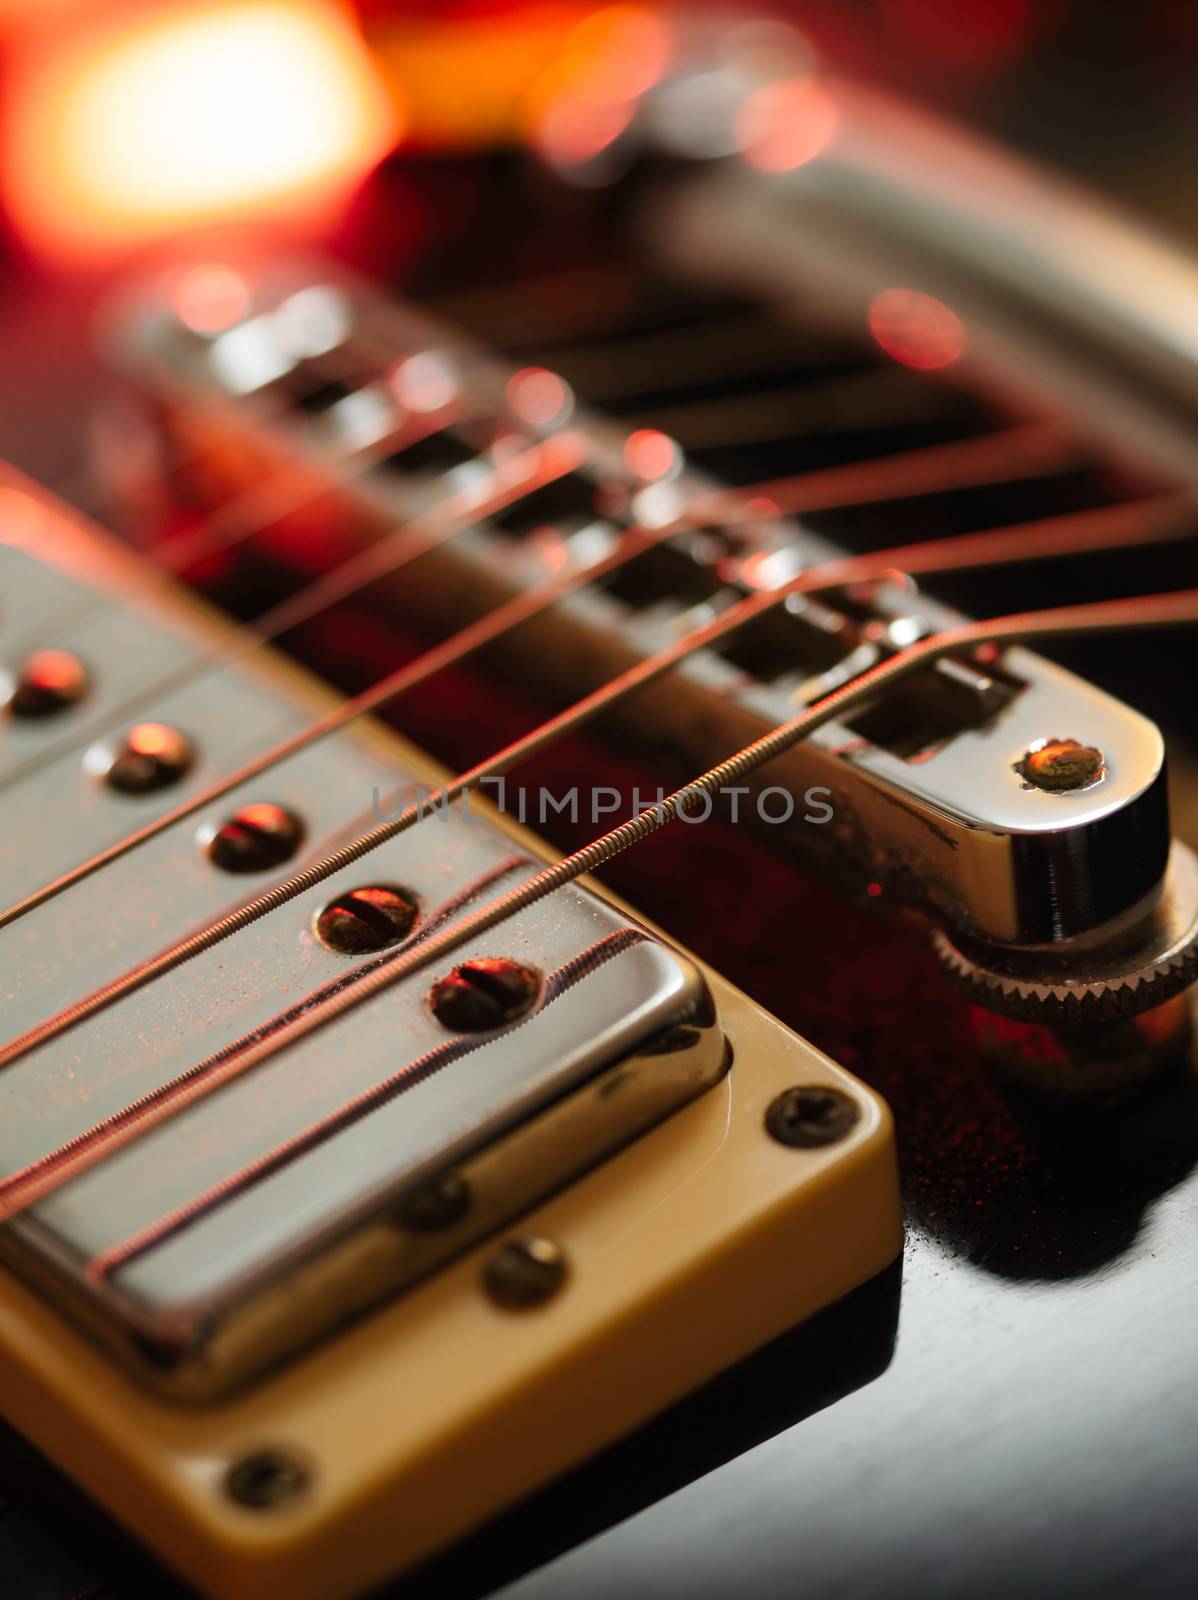 Macro abstract photo of the pickups, bridge and strings of an electric guitar. Shallow depth of field with focus on the first string.